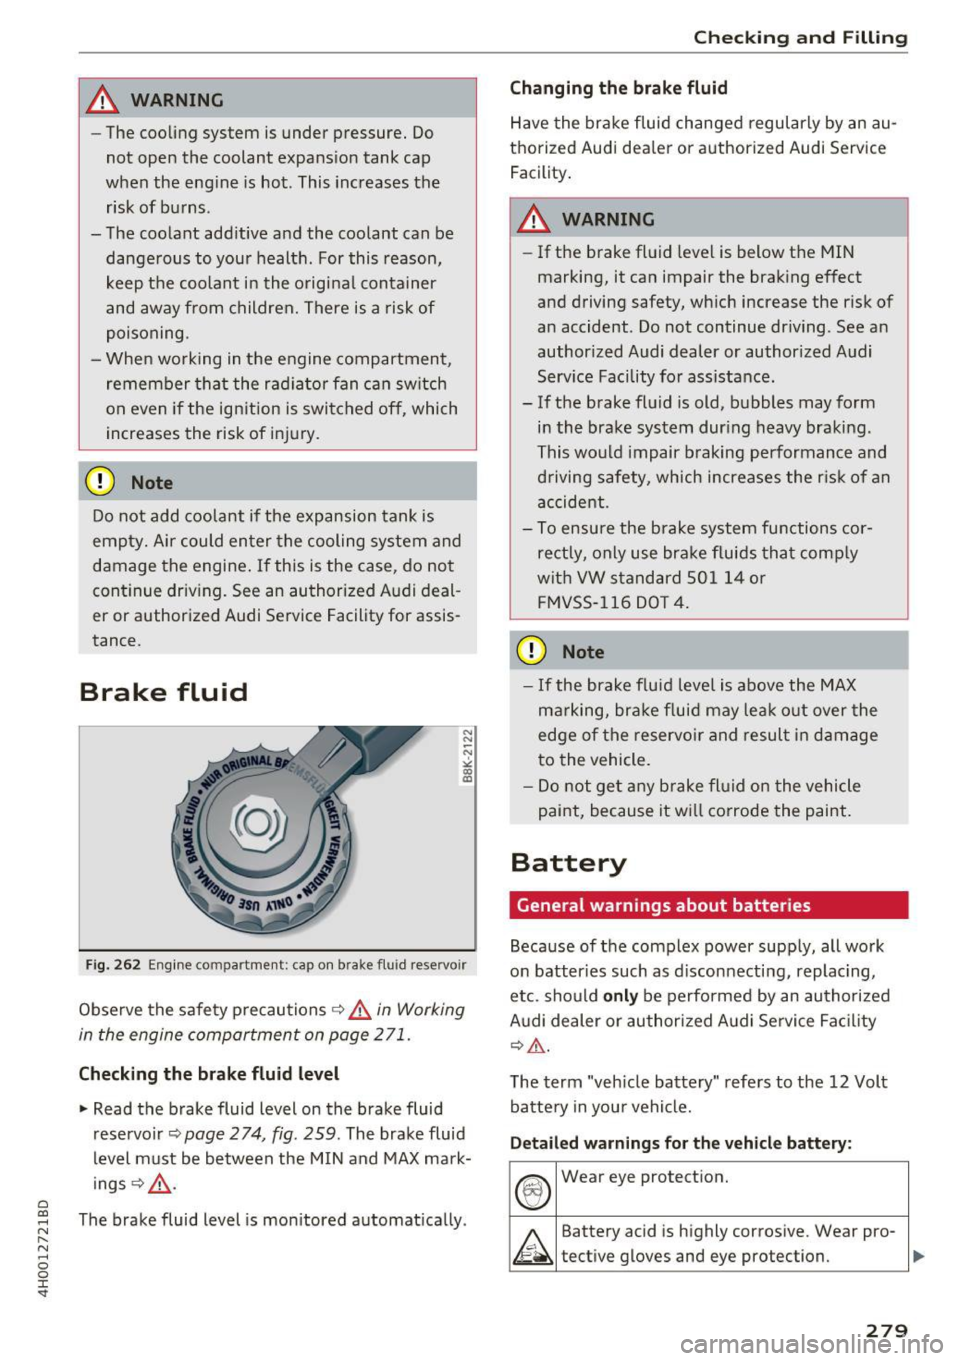 AUDI A8 2017  Owners Manual C) 
_& WARNING 
-The cooling  system  is  under pressure.  Do 
not  open  the  coolant  expansion tank  cap 
when  the  engine  is hot. This increases  the 
risk of  burns . 
- The  coolant  add itive